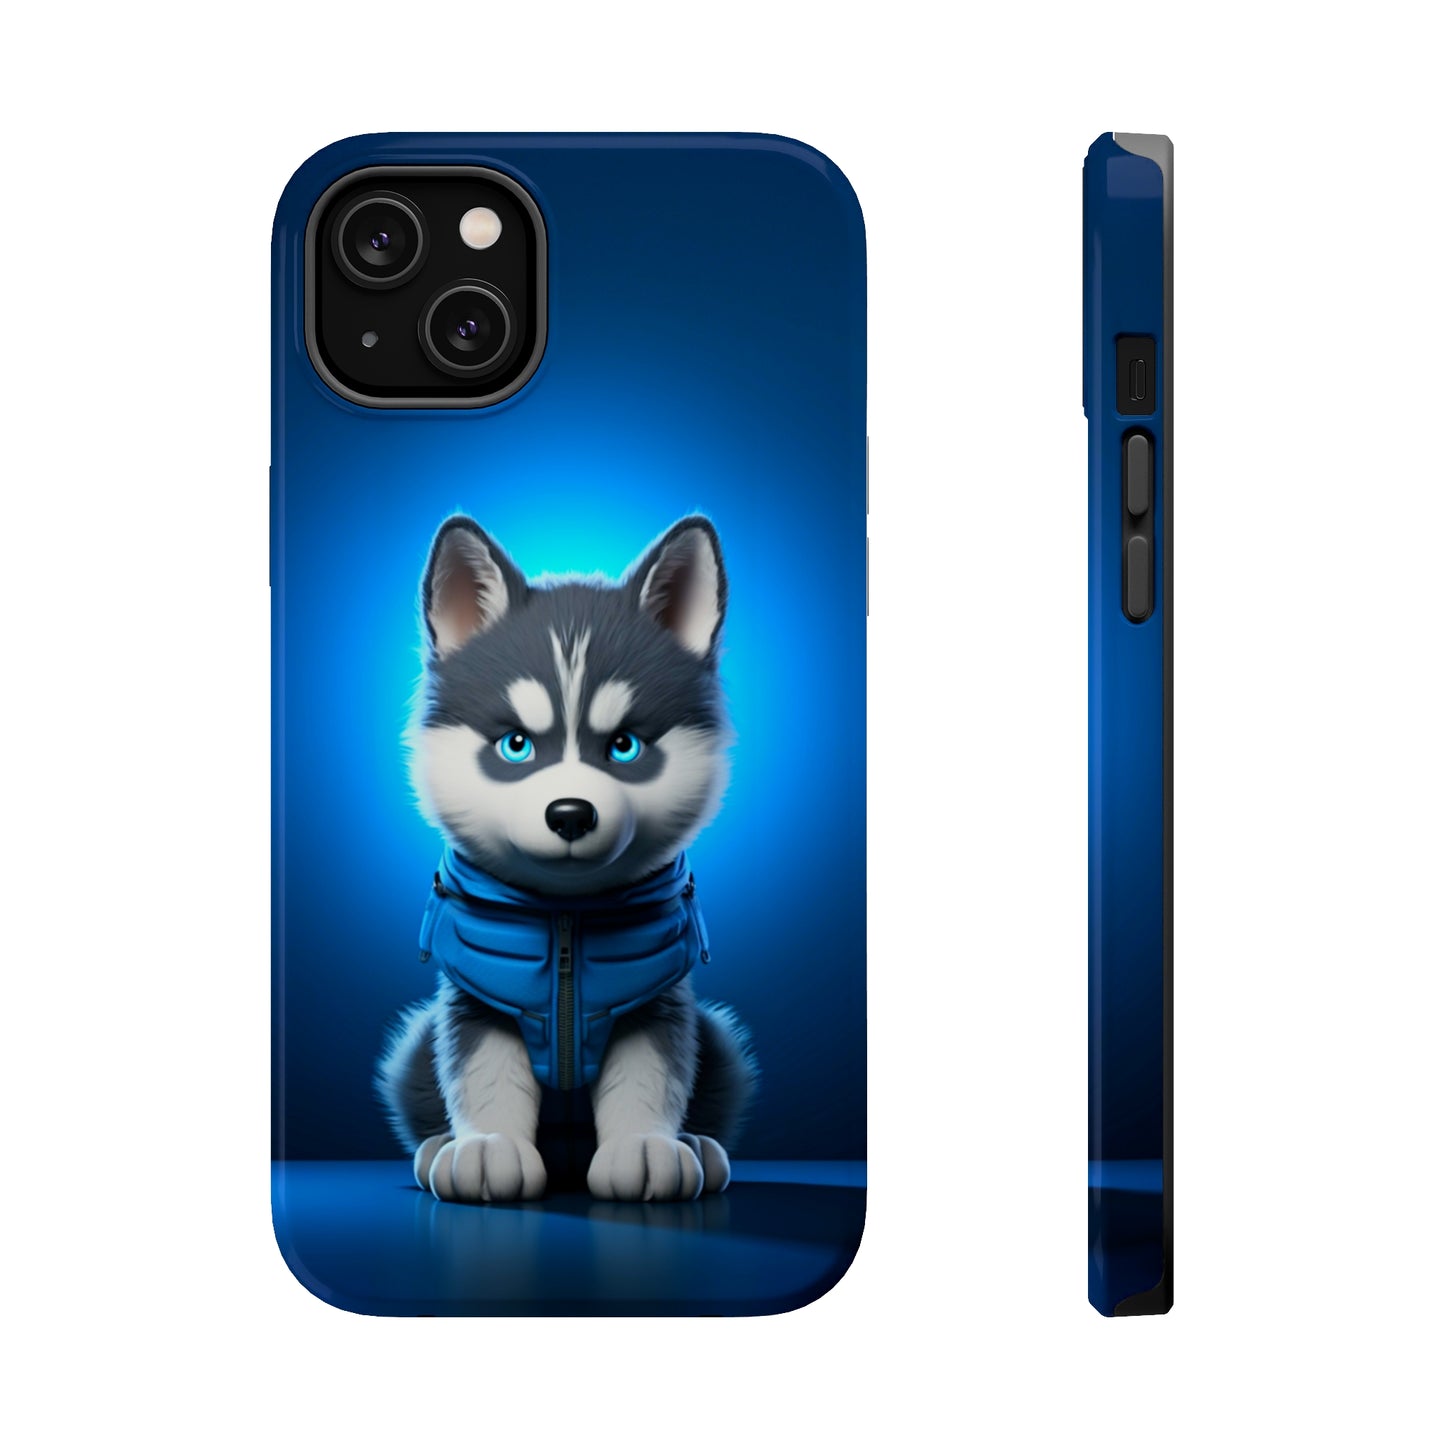 Blue Husky Charm (iPhone MagSafe Case)Blue Husky Charm MagSafe Durable Case: Style Meets Protection 📱✨
Upgrade your device with Rima Gallery's Blue Husky Charm MagSafe Durable Case. This case isn’t justRimaGallery